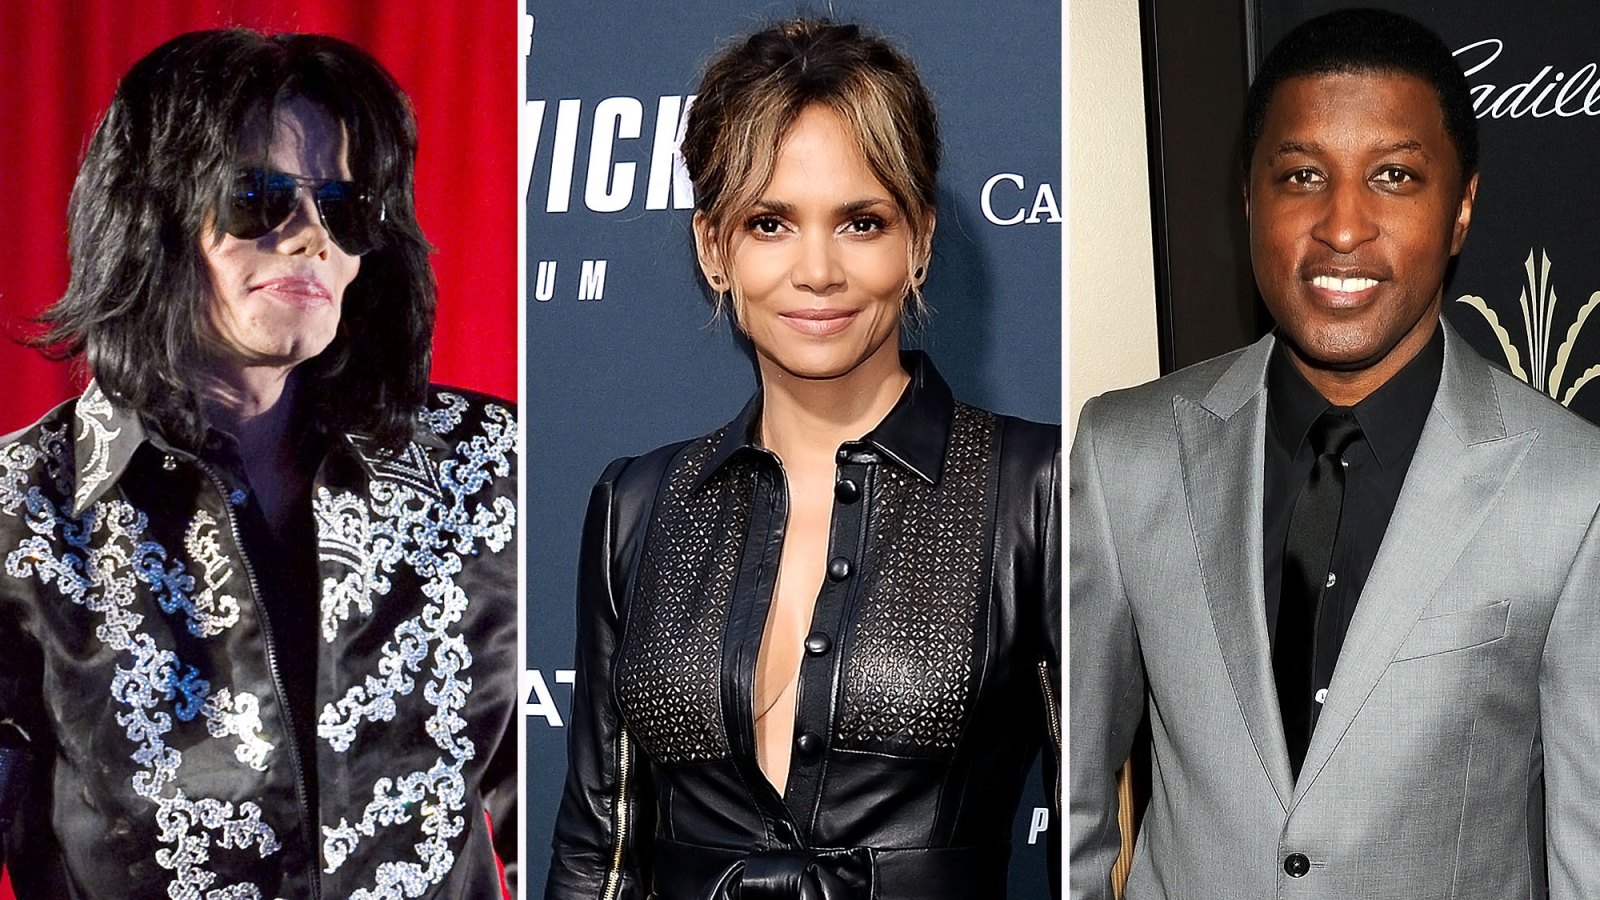 Michael Jackson Once Asked Be Set Up Date With Halle Berry Babyface Says